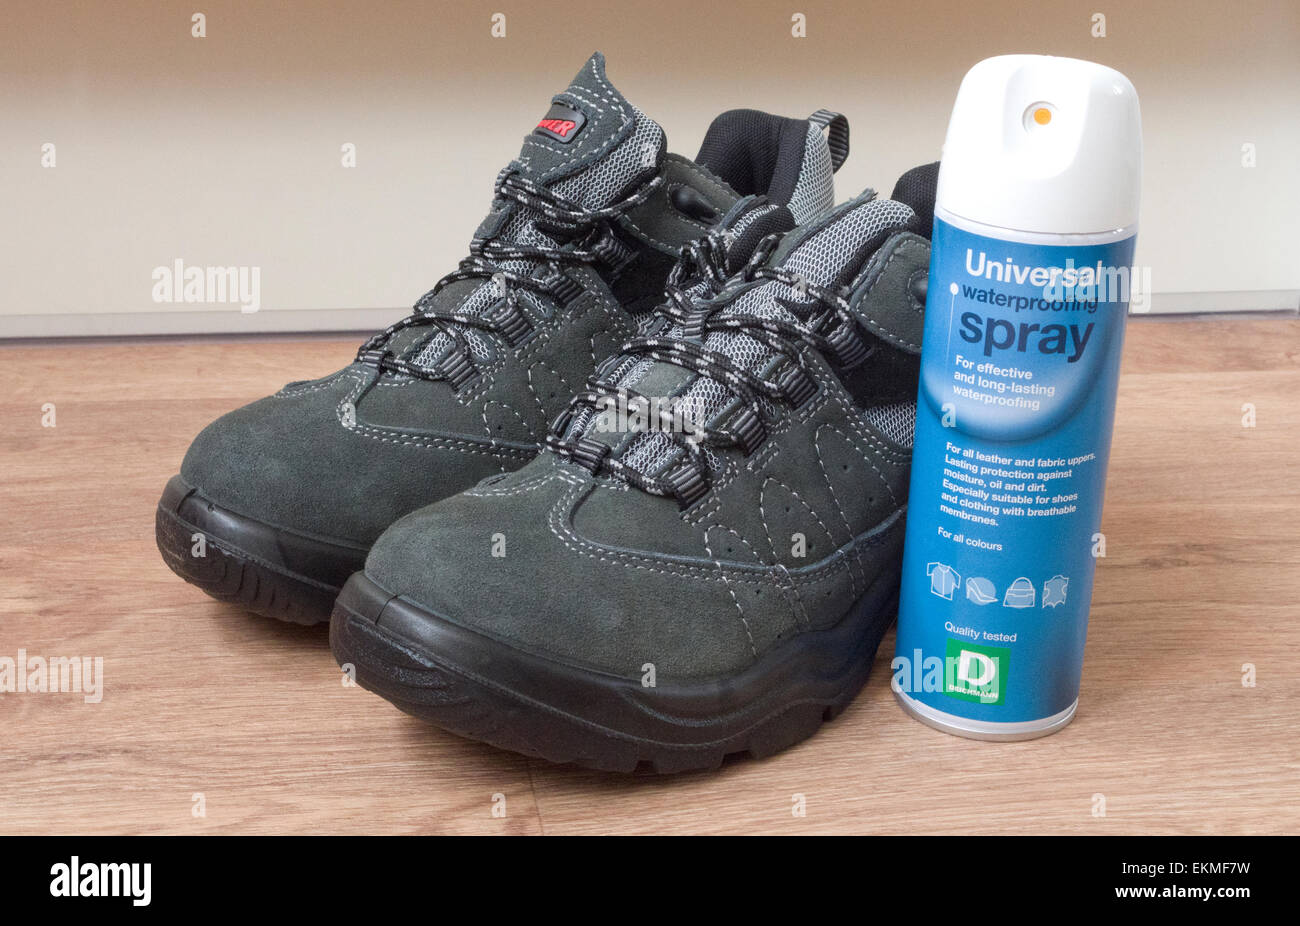 Walking Boots With A Can of Waterproofing Spray, UK Stock Photo